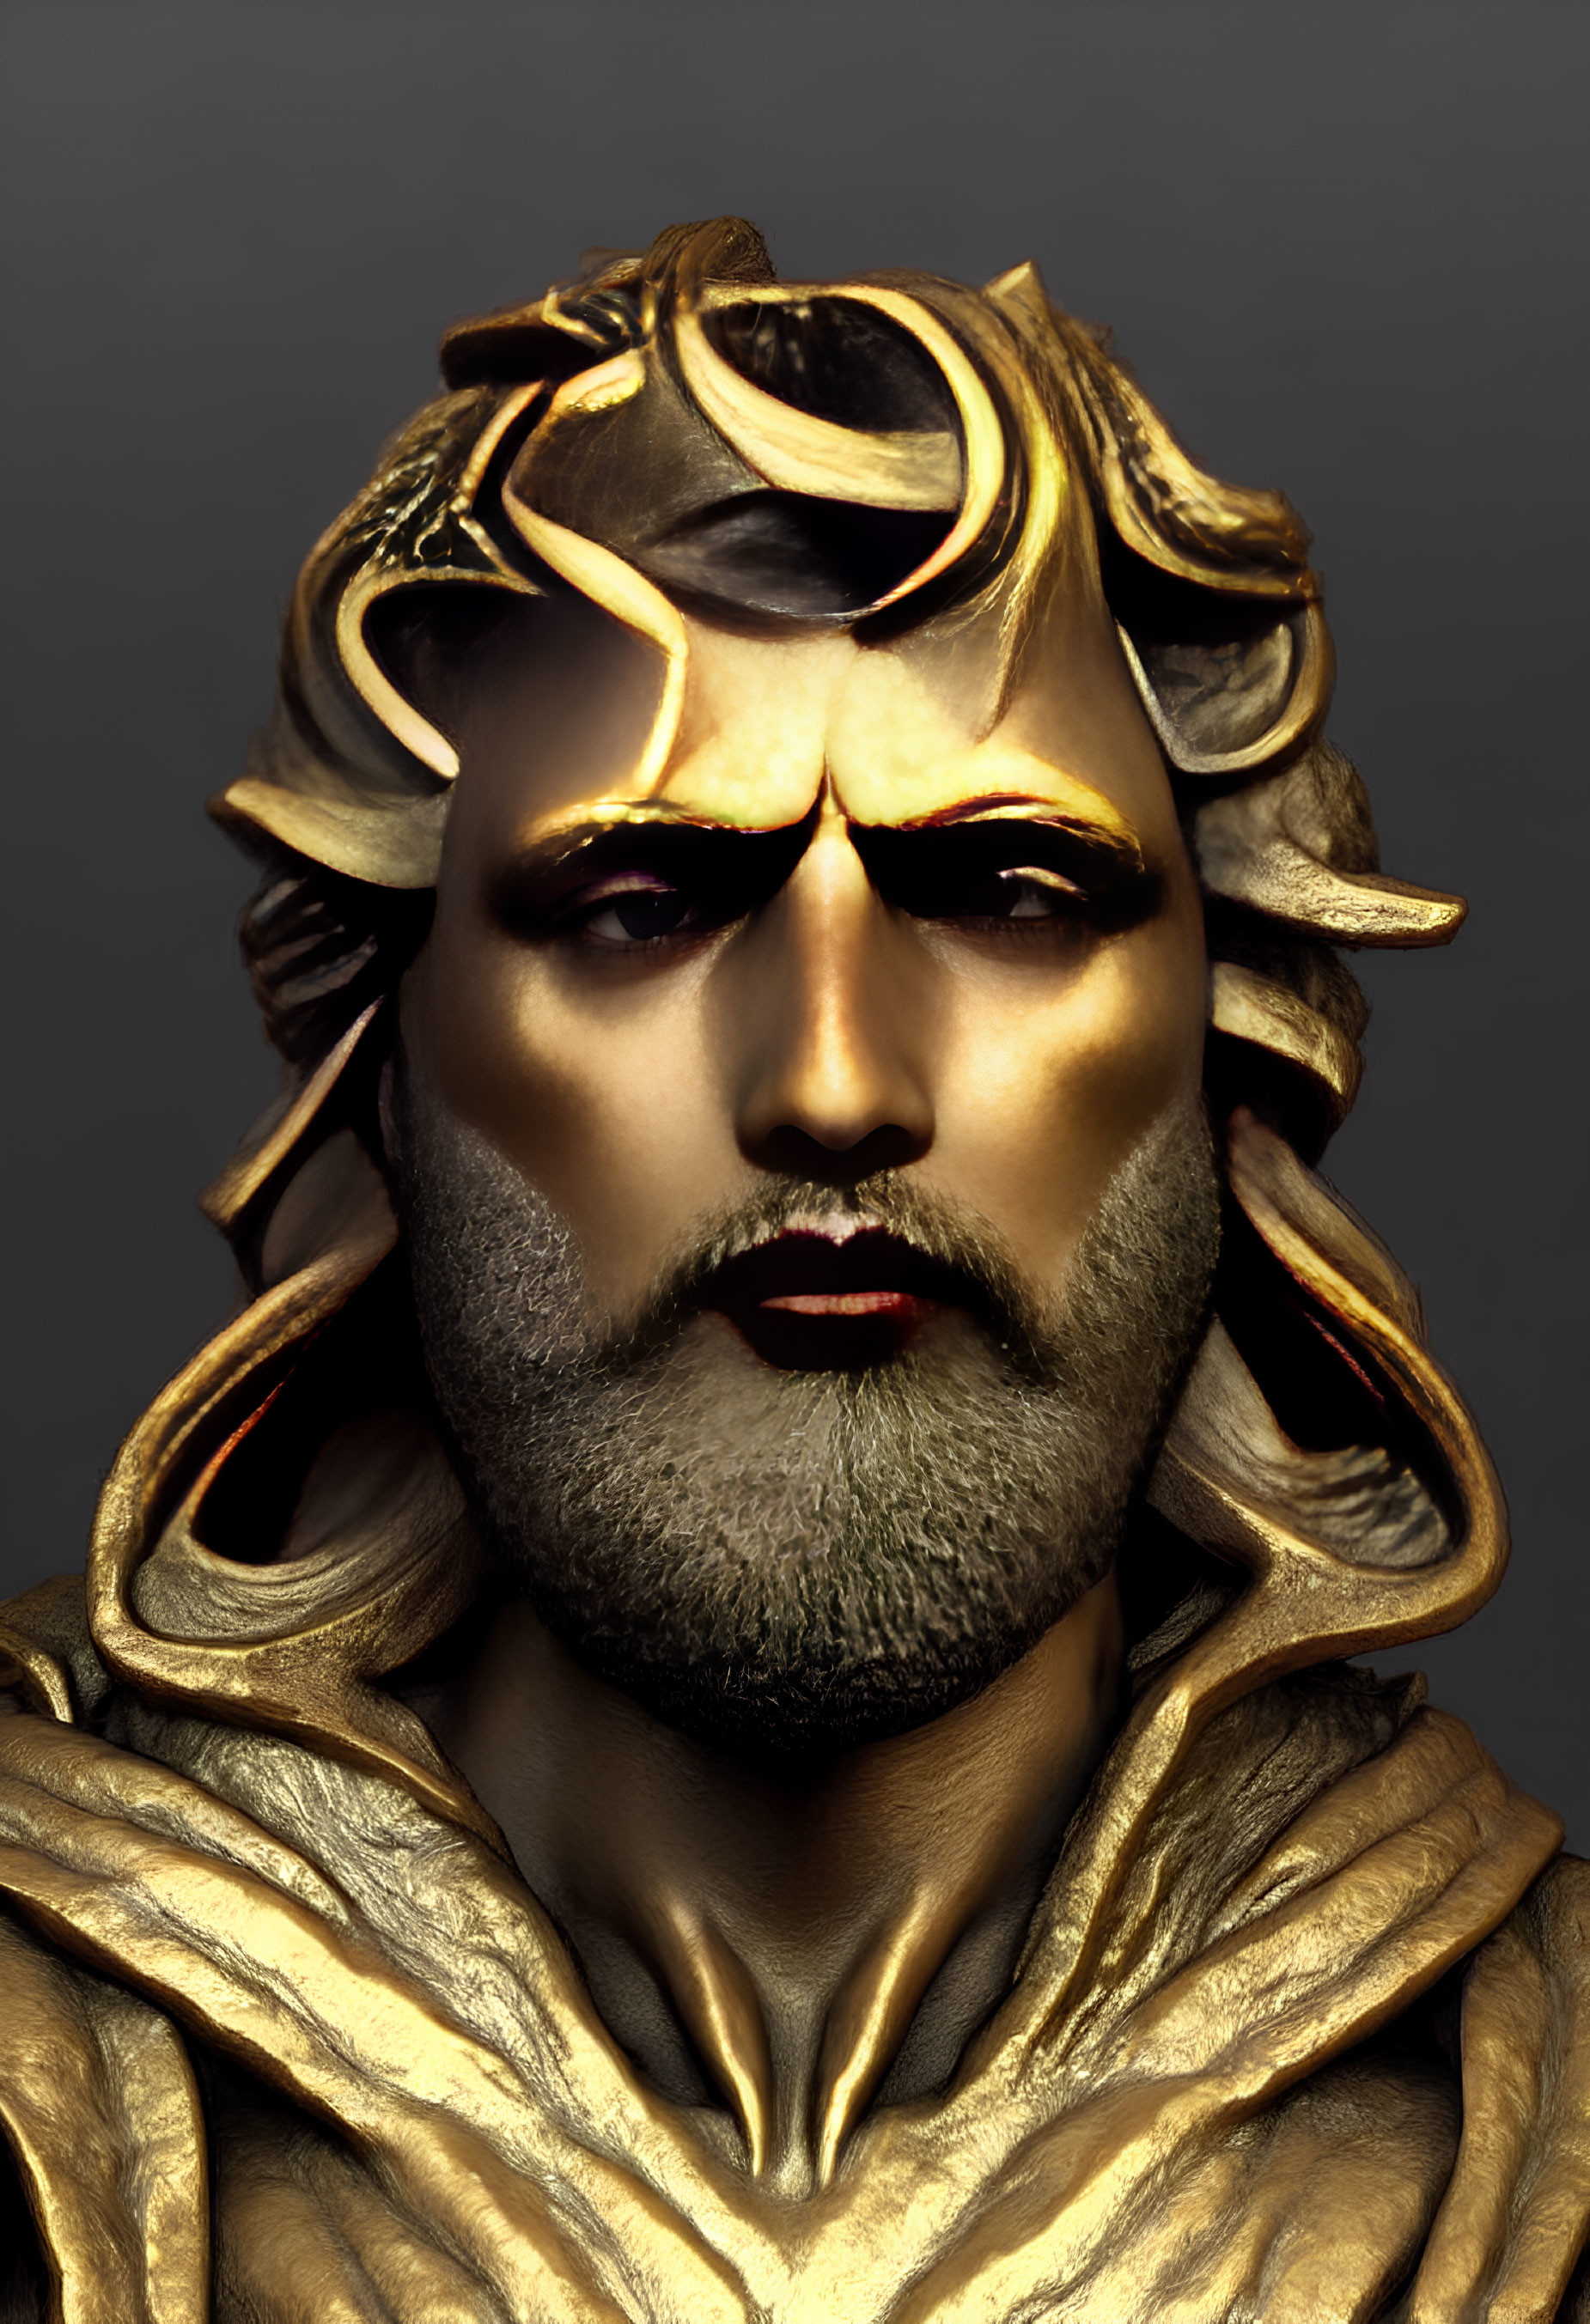 Golden makeup and serpentine accents on figure against grey background